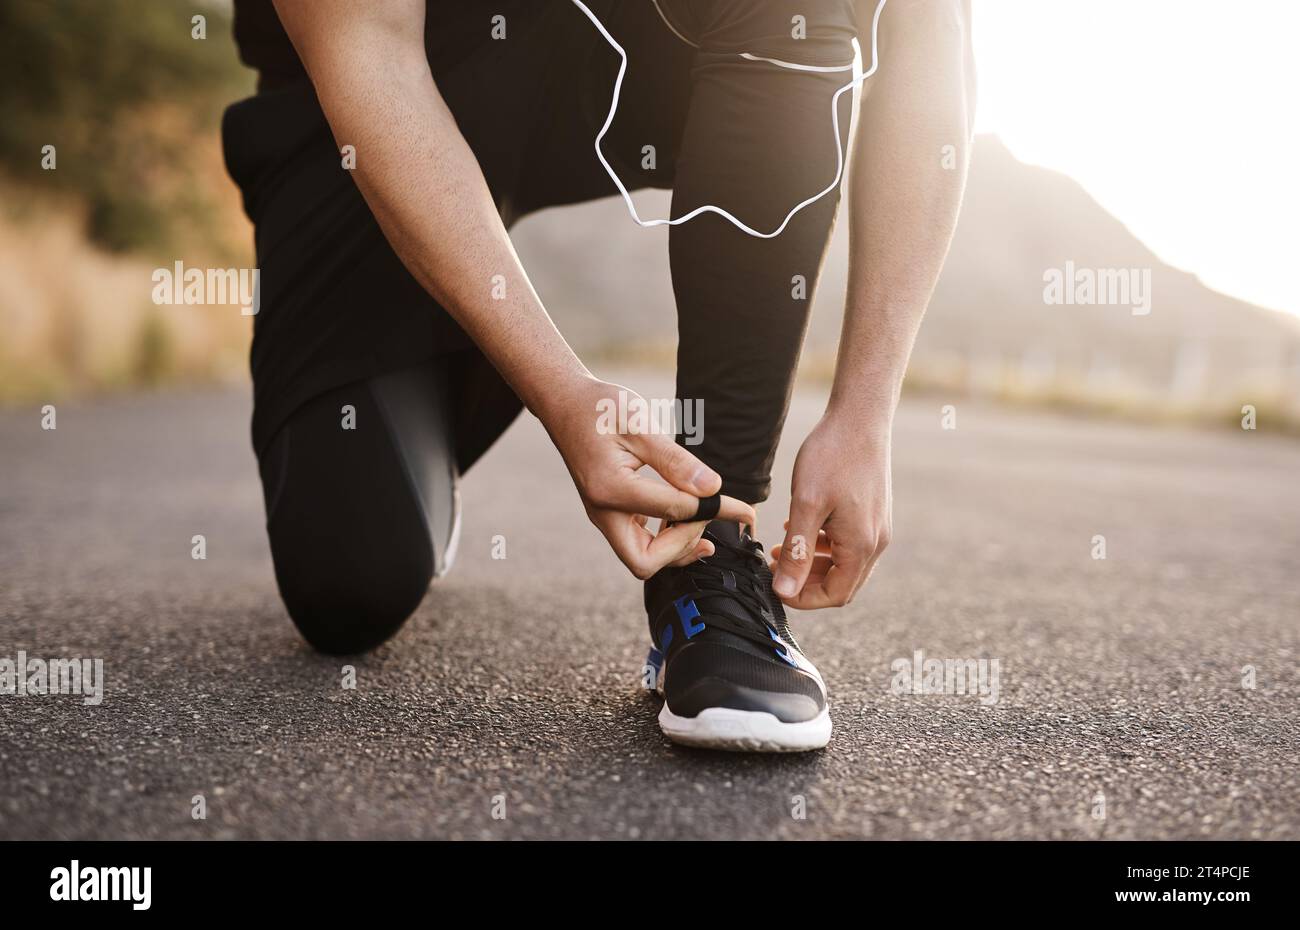 Lacing up to run in the direction of his goals. Closeup shot of an unrecognizable man tying his shoelaces while exercising outdoors. Stock Photo